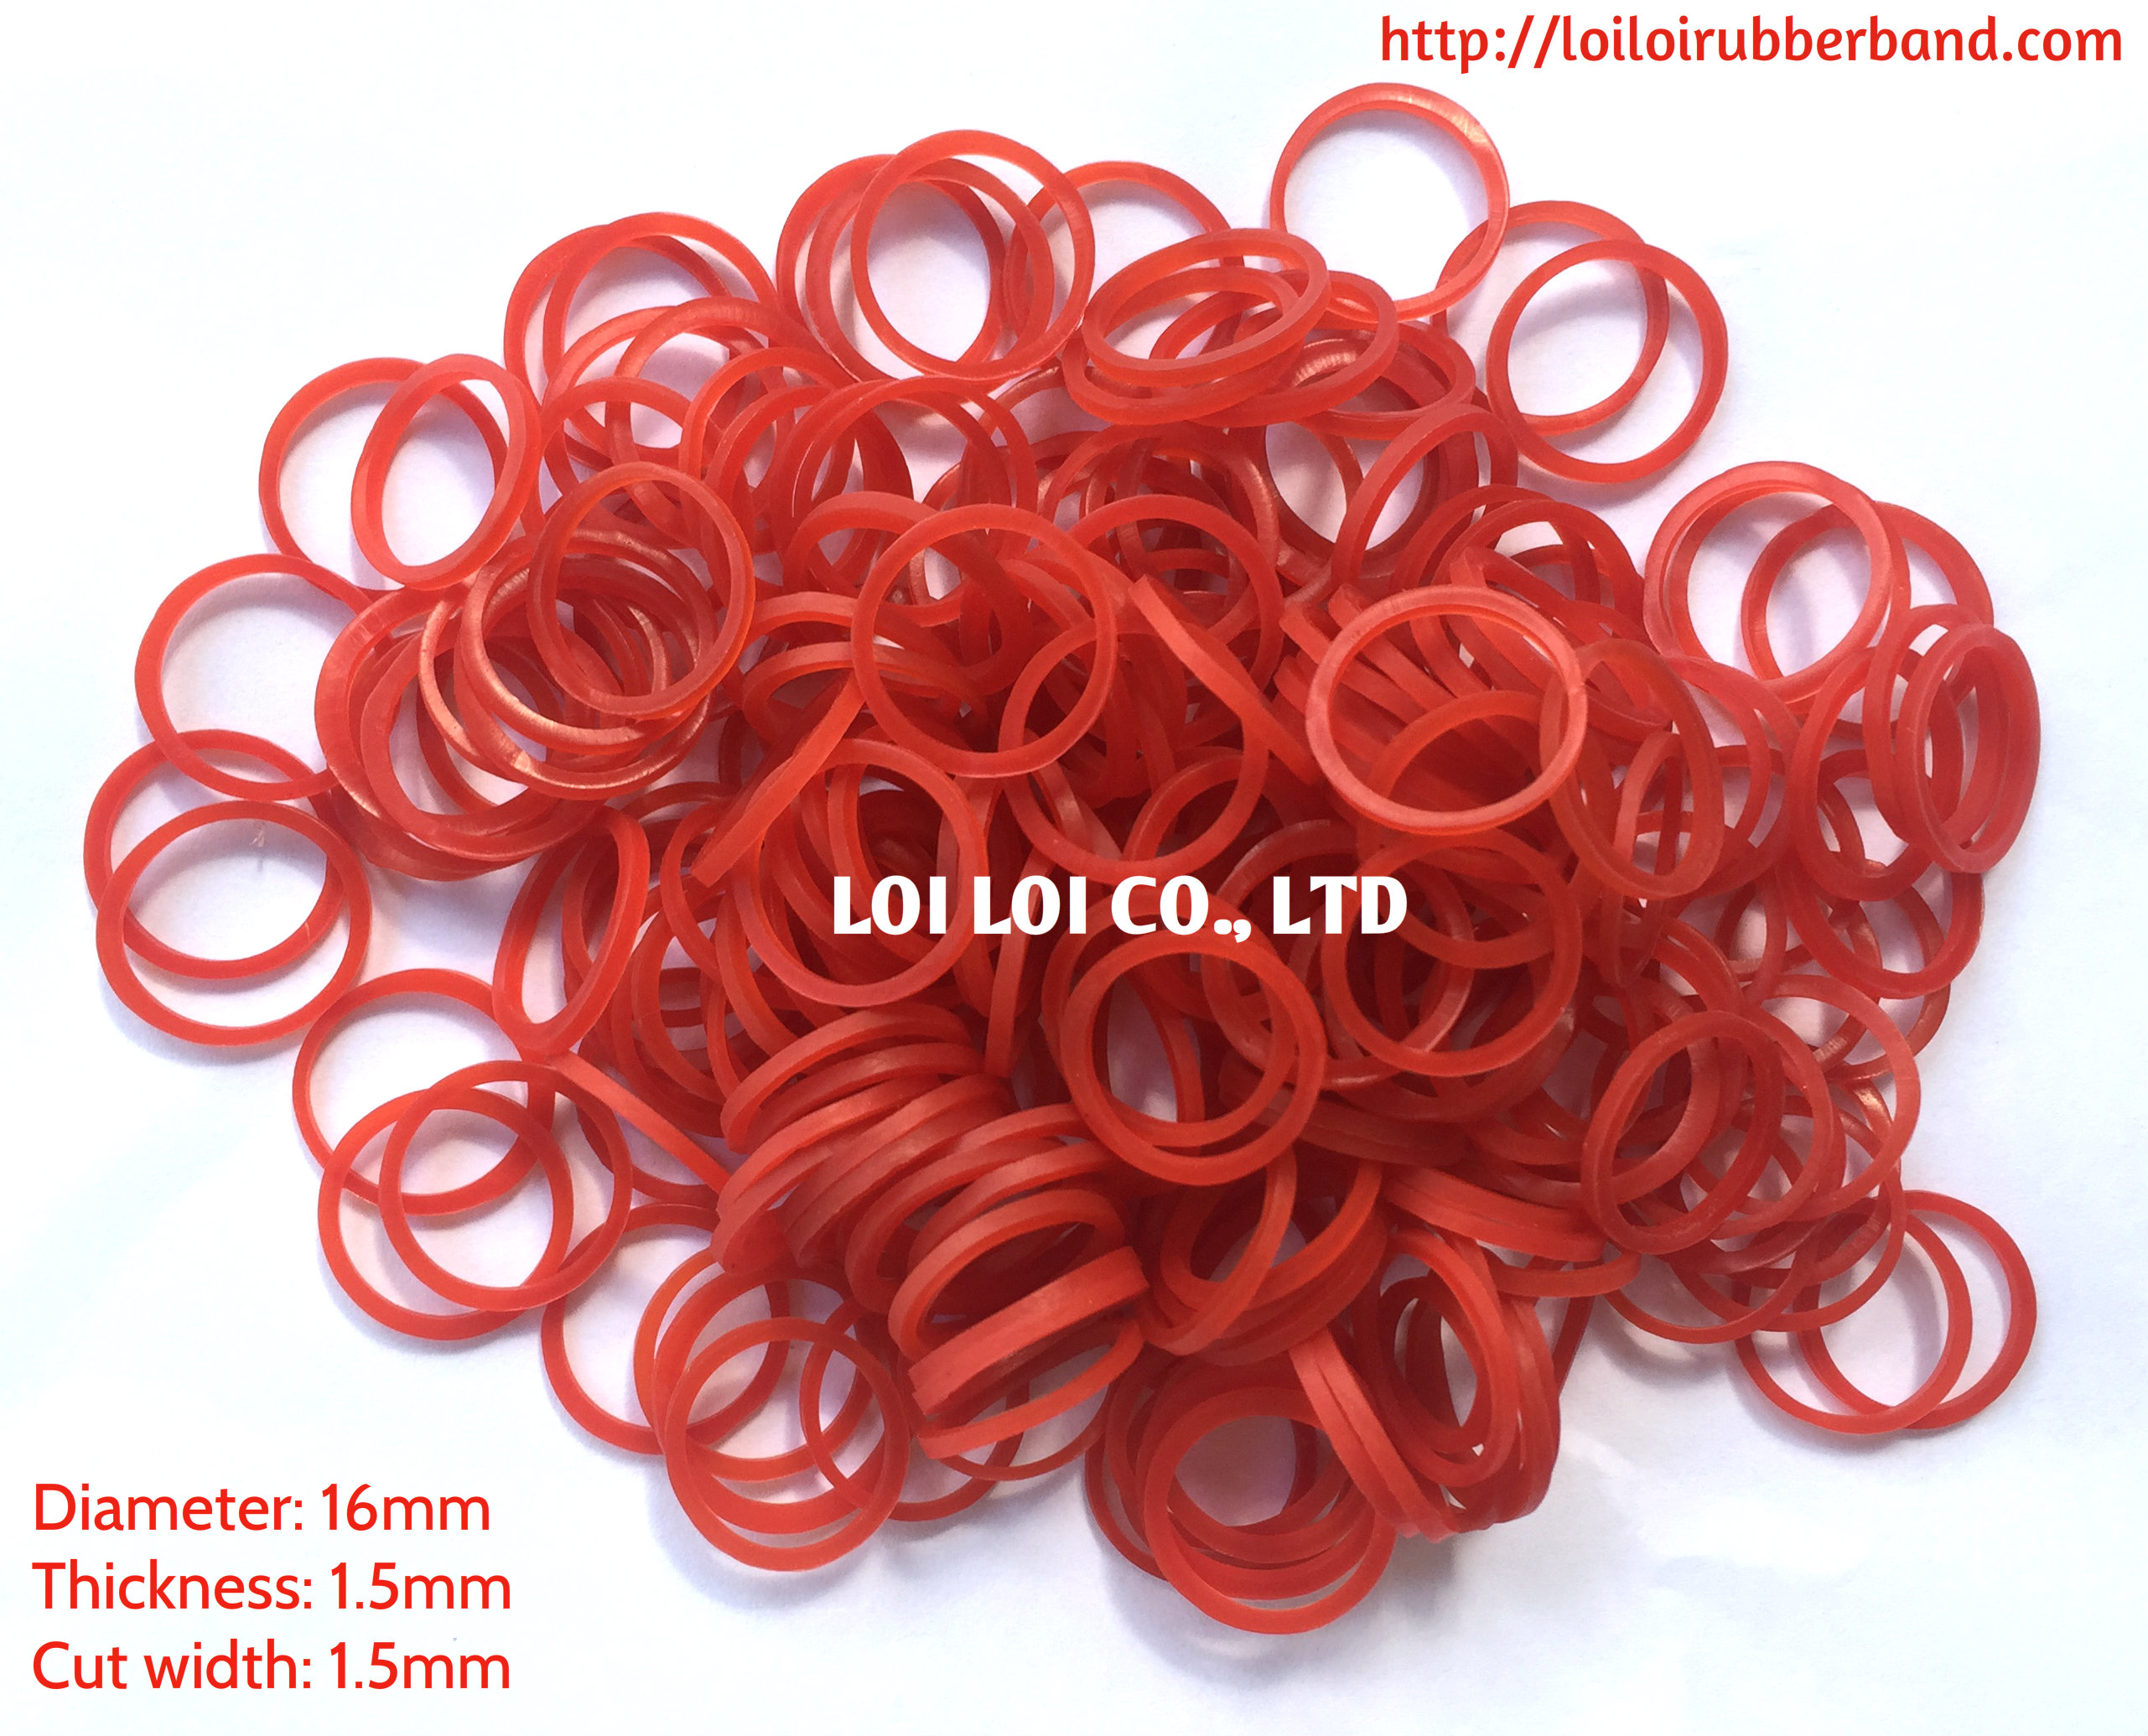 High quality durable small Red rubber band 16mm for any purposes at factory direct prices